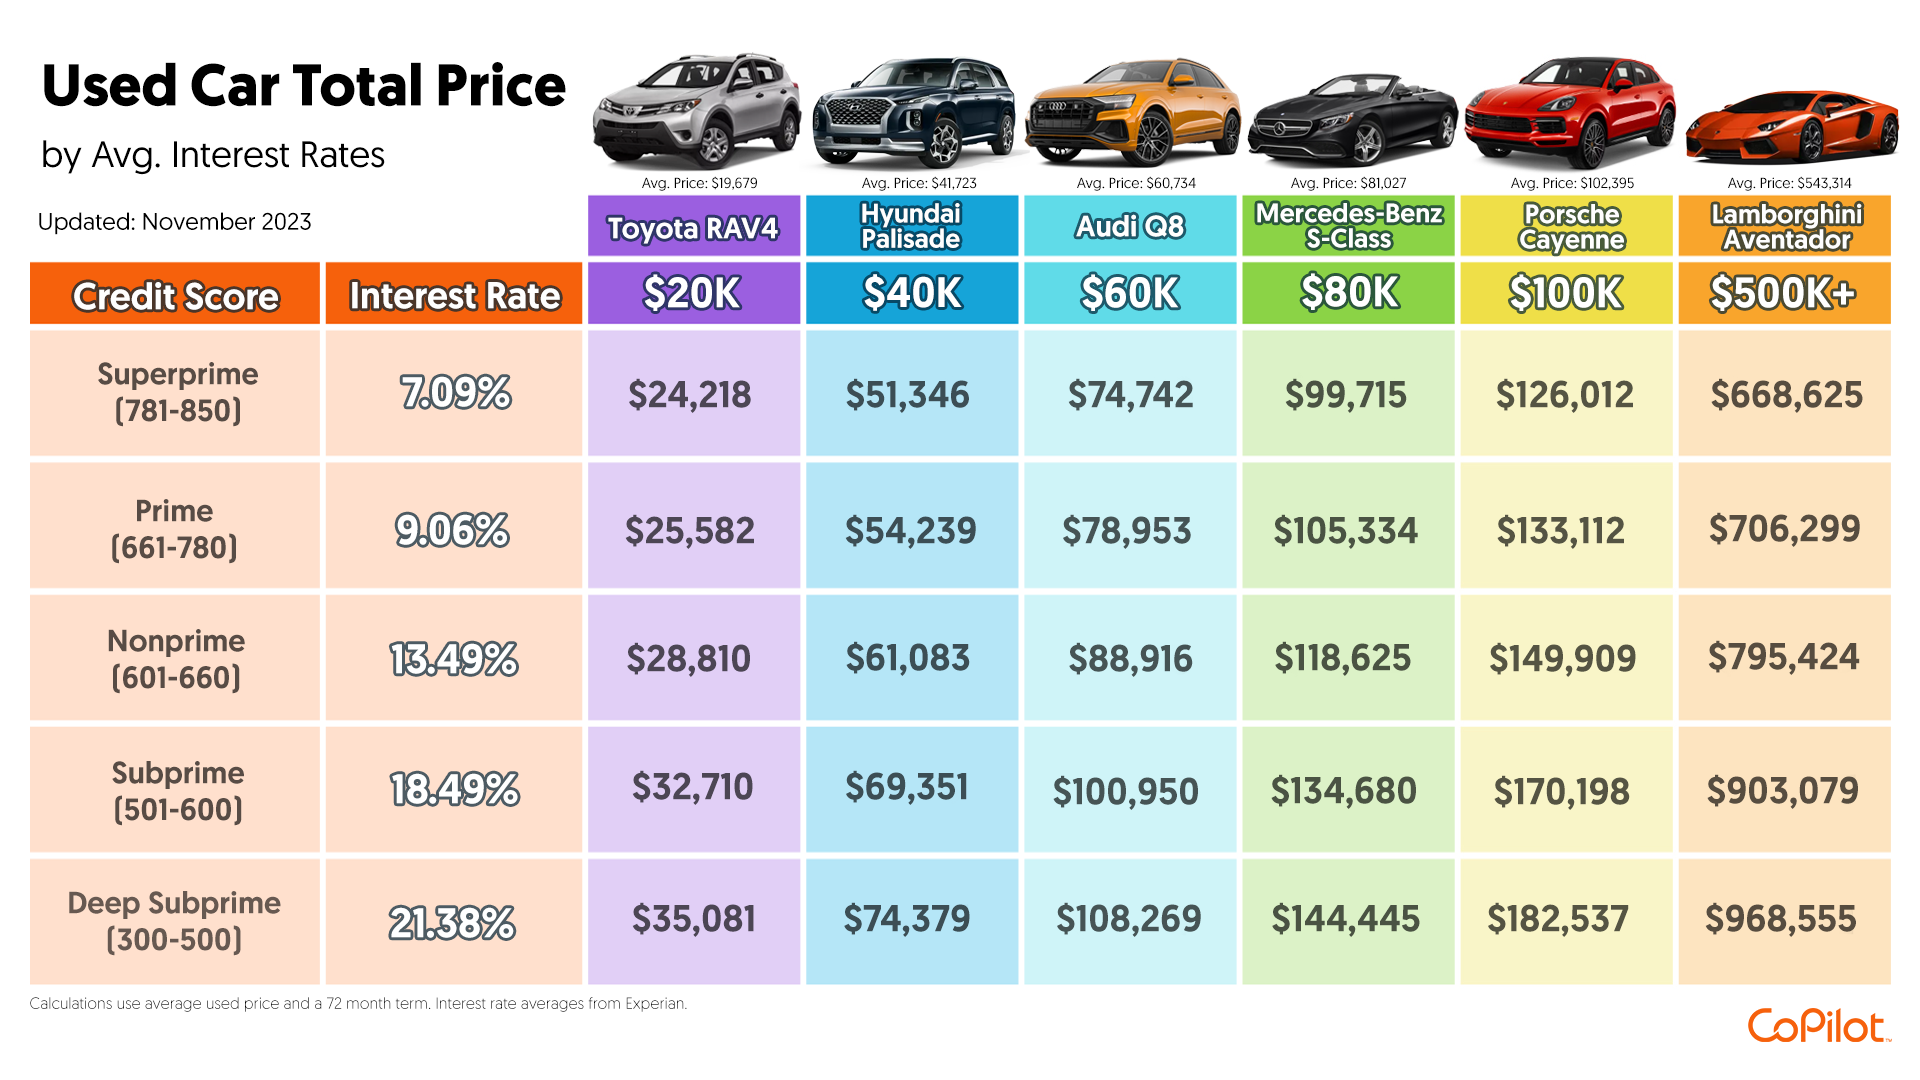 Total cost amounts for used cars at various price levels and interest rates